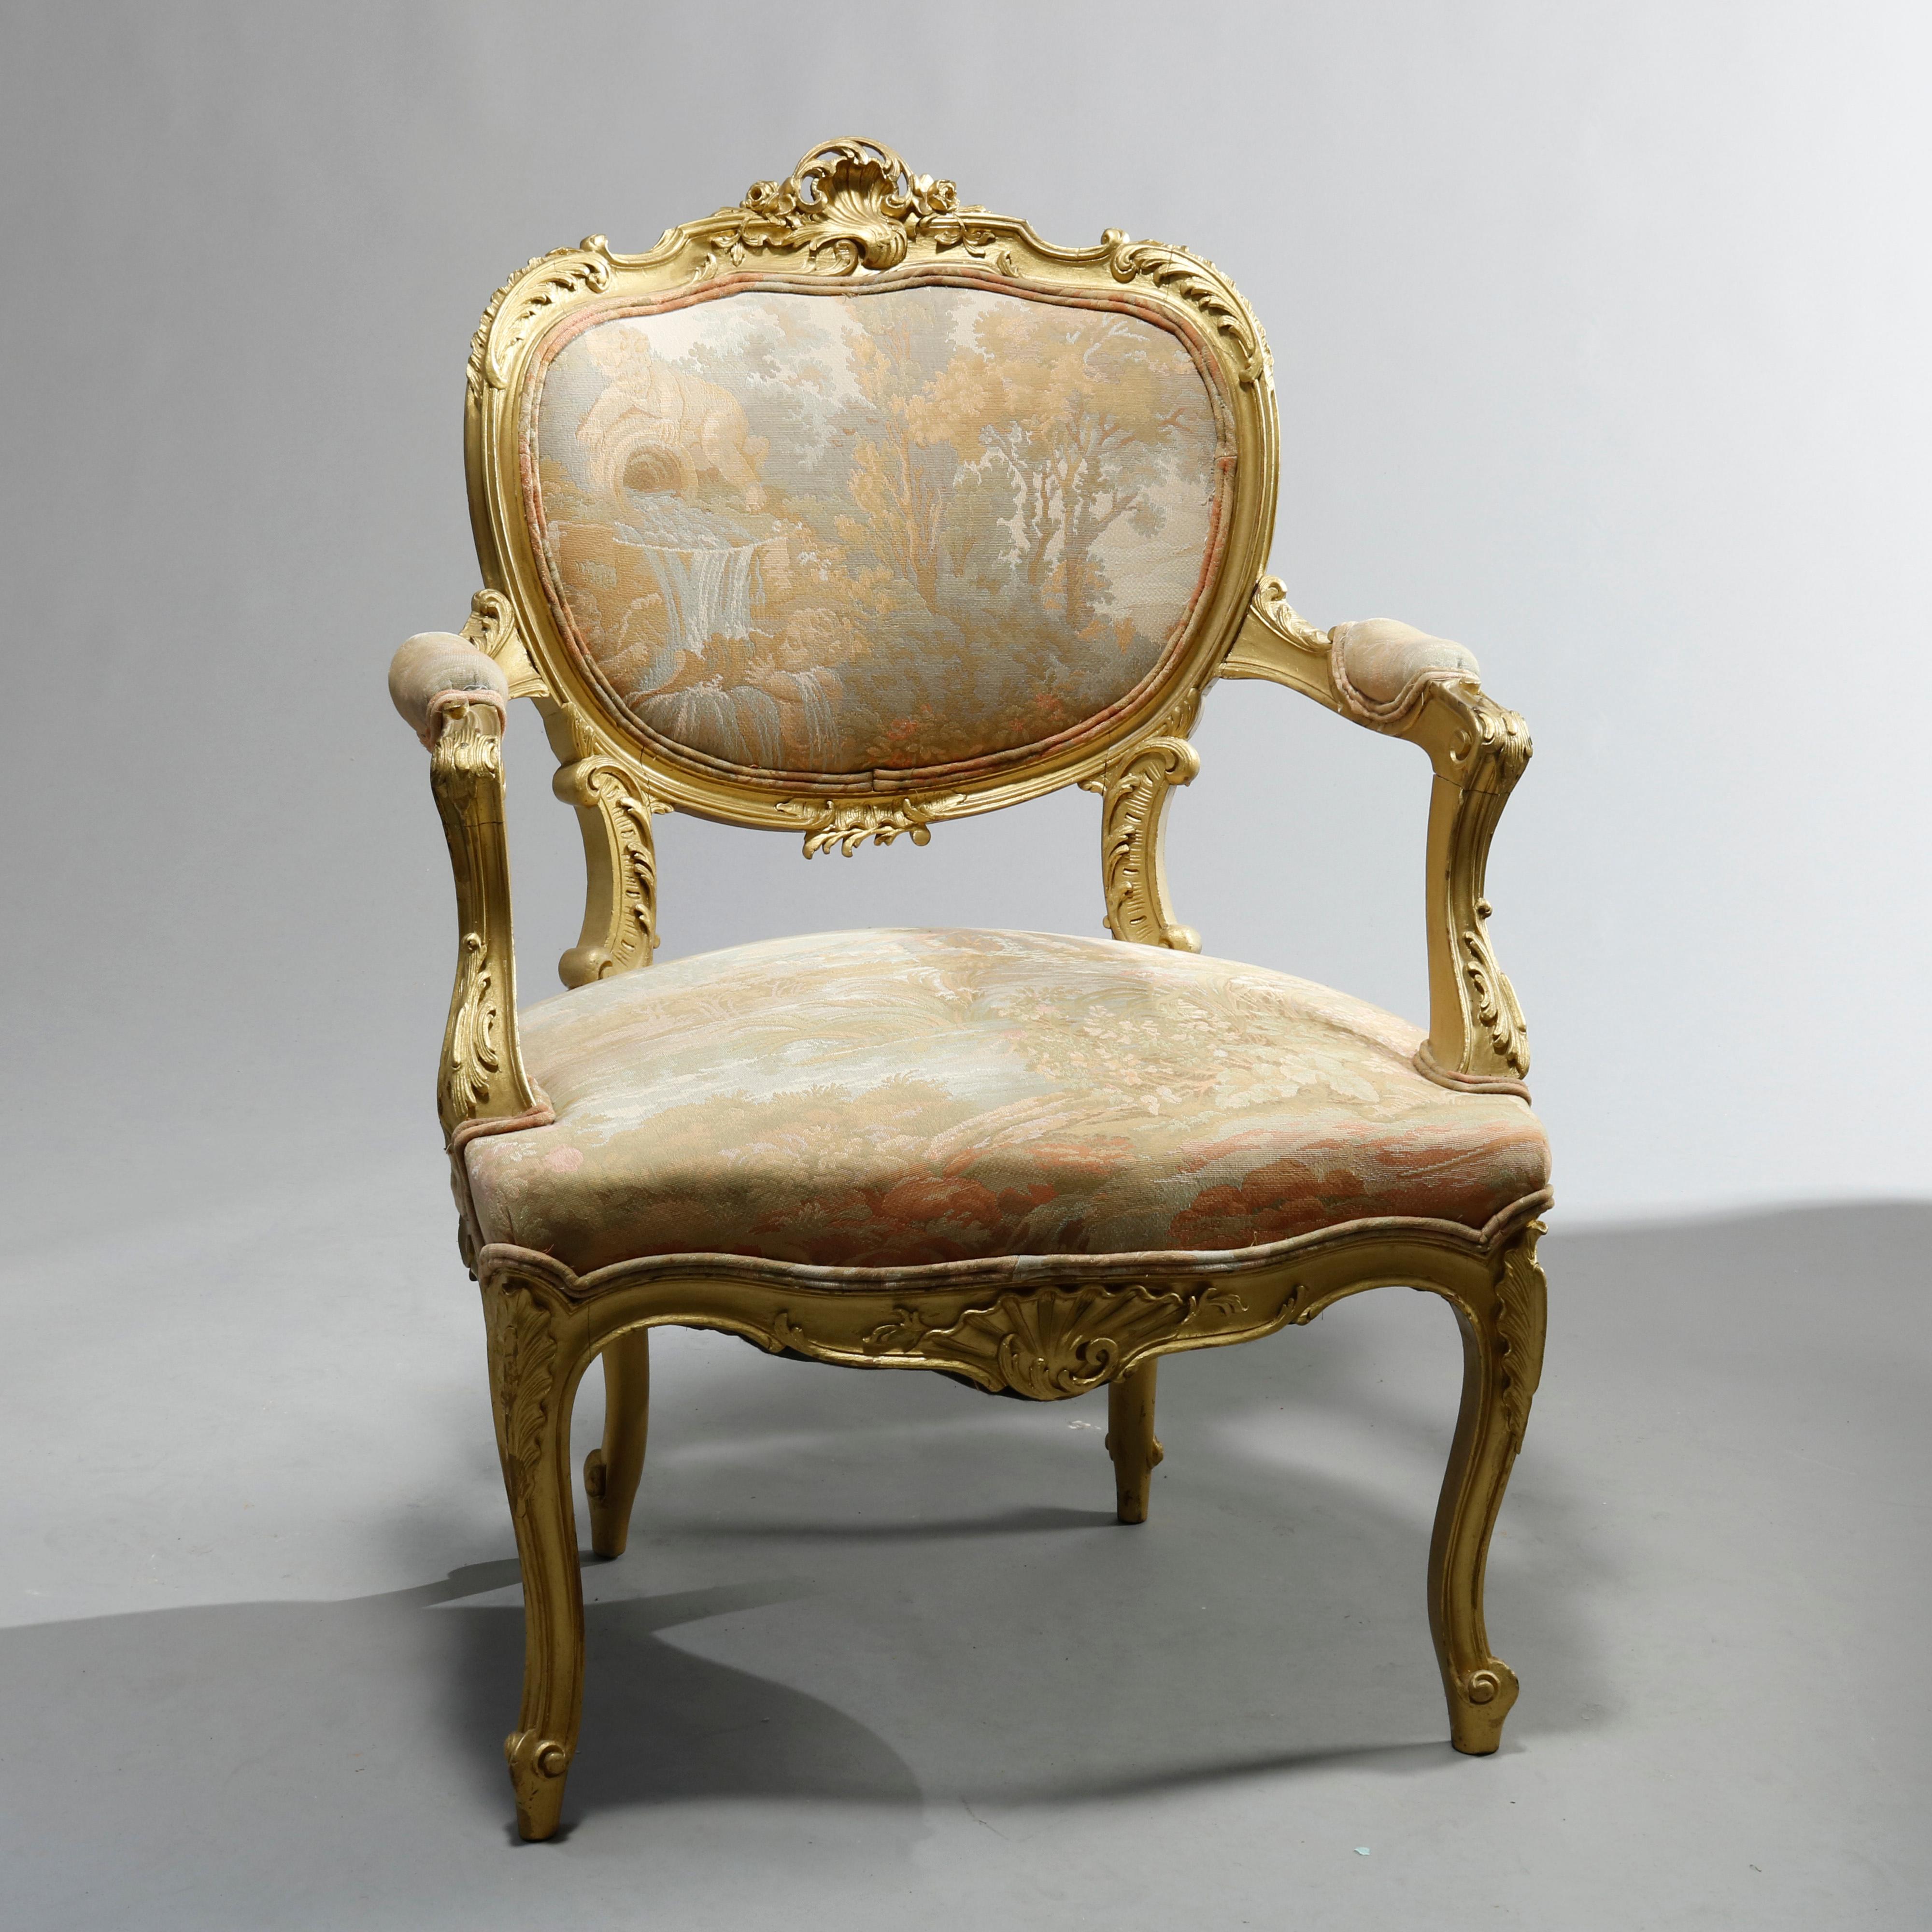 Upholstery Antique French Rococo Three Piece Giltwood & Tapestry Parlor Set, Circa 1900